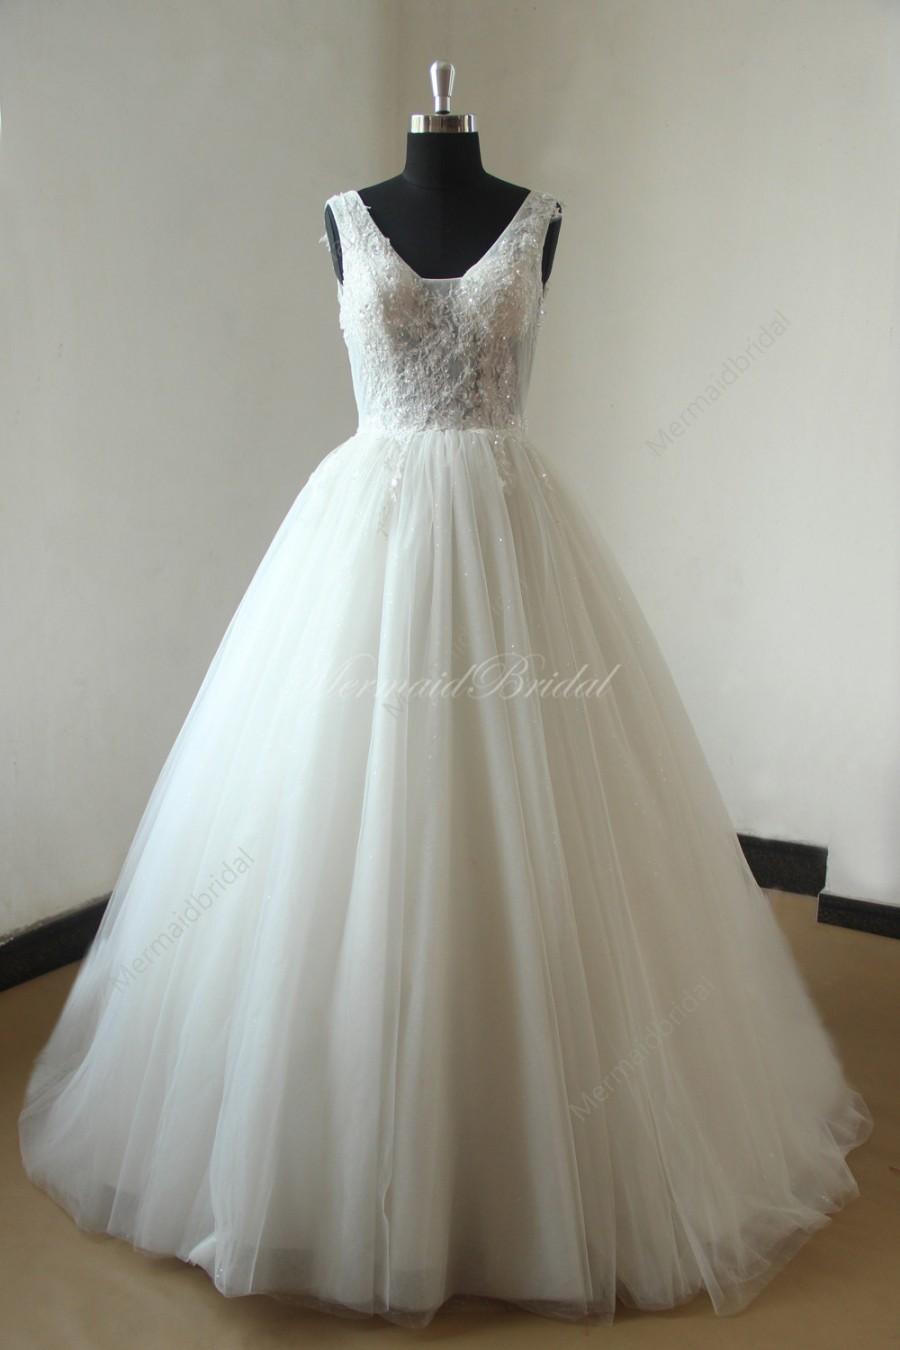 Mariage - Heavy beading ivory blingbling tulle ball gown lace wedding dress